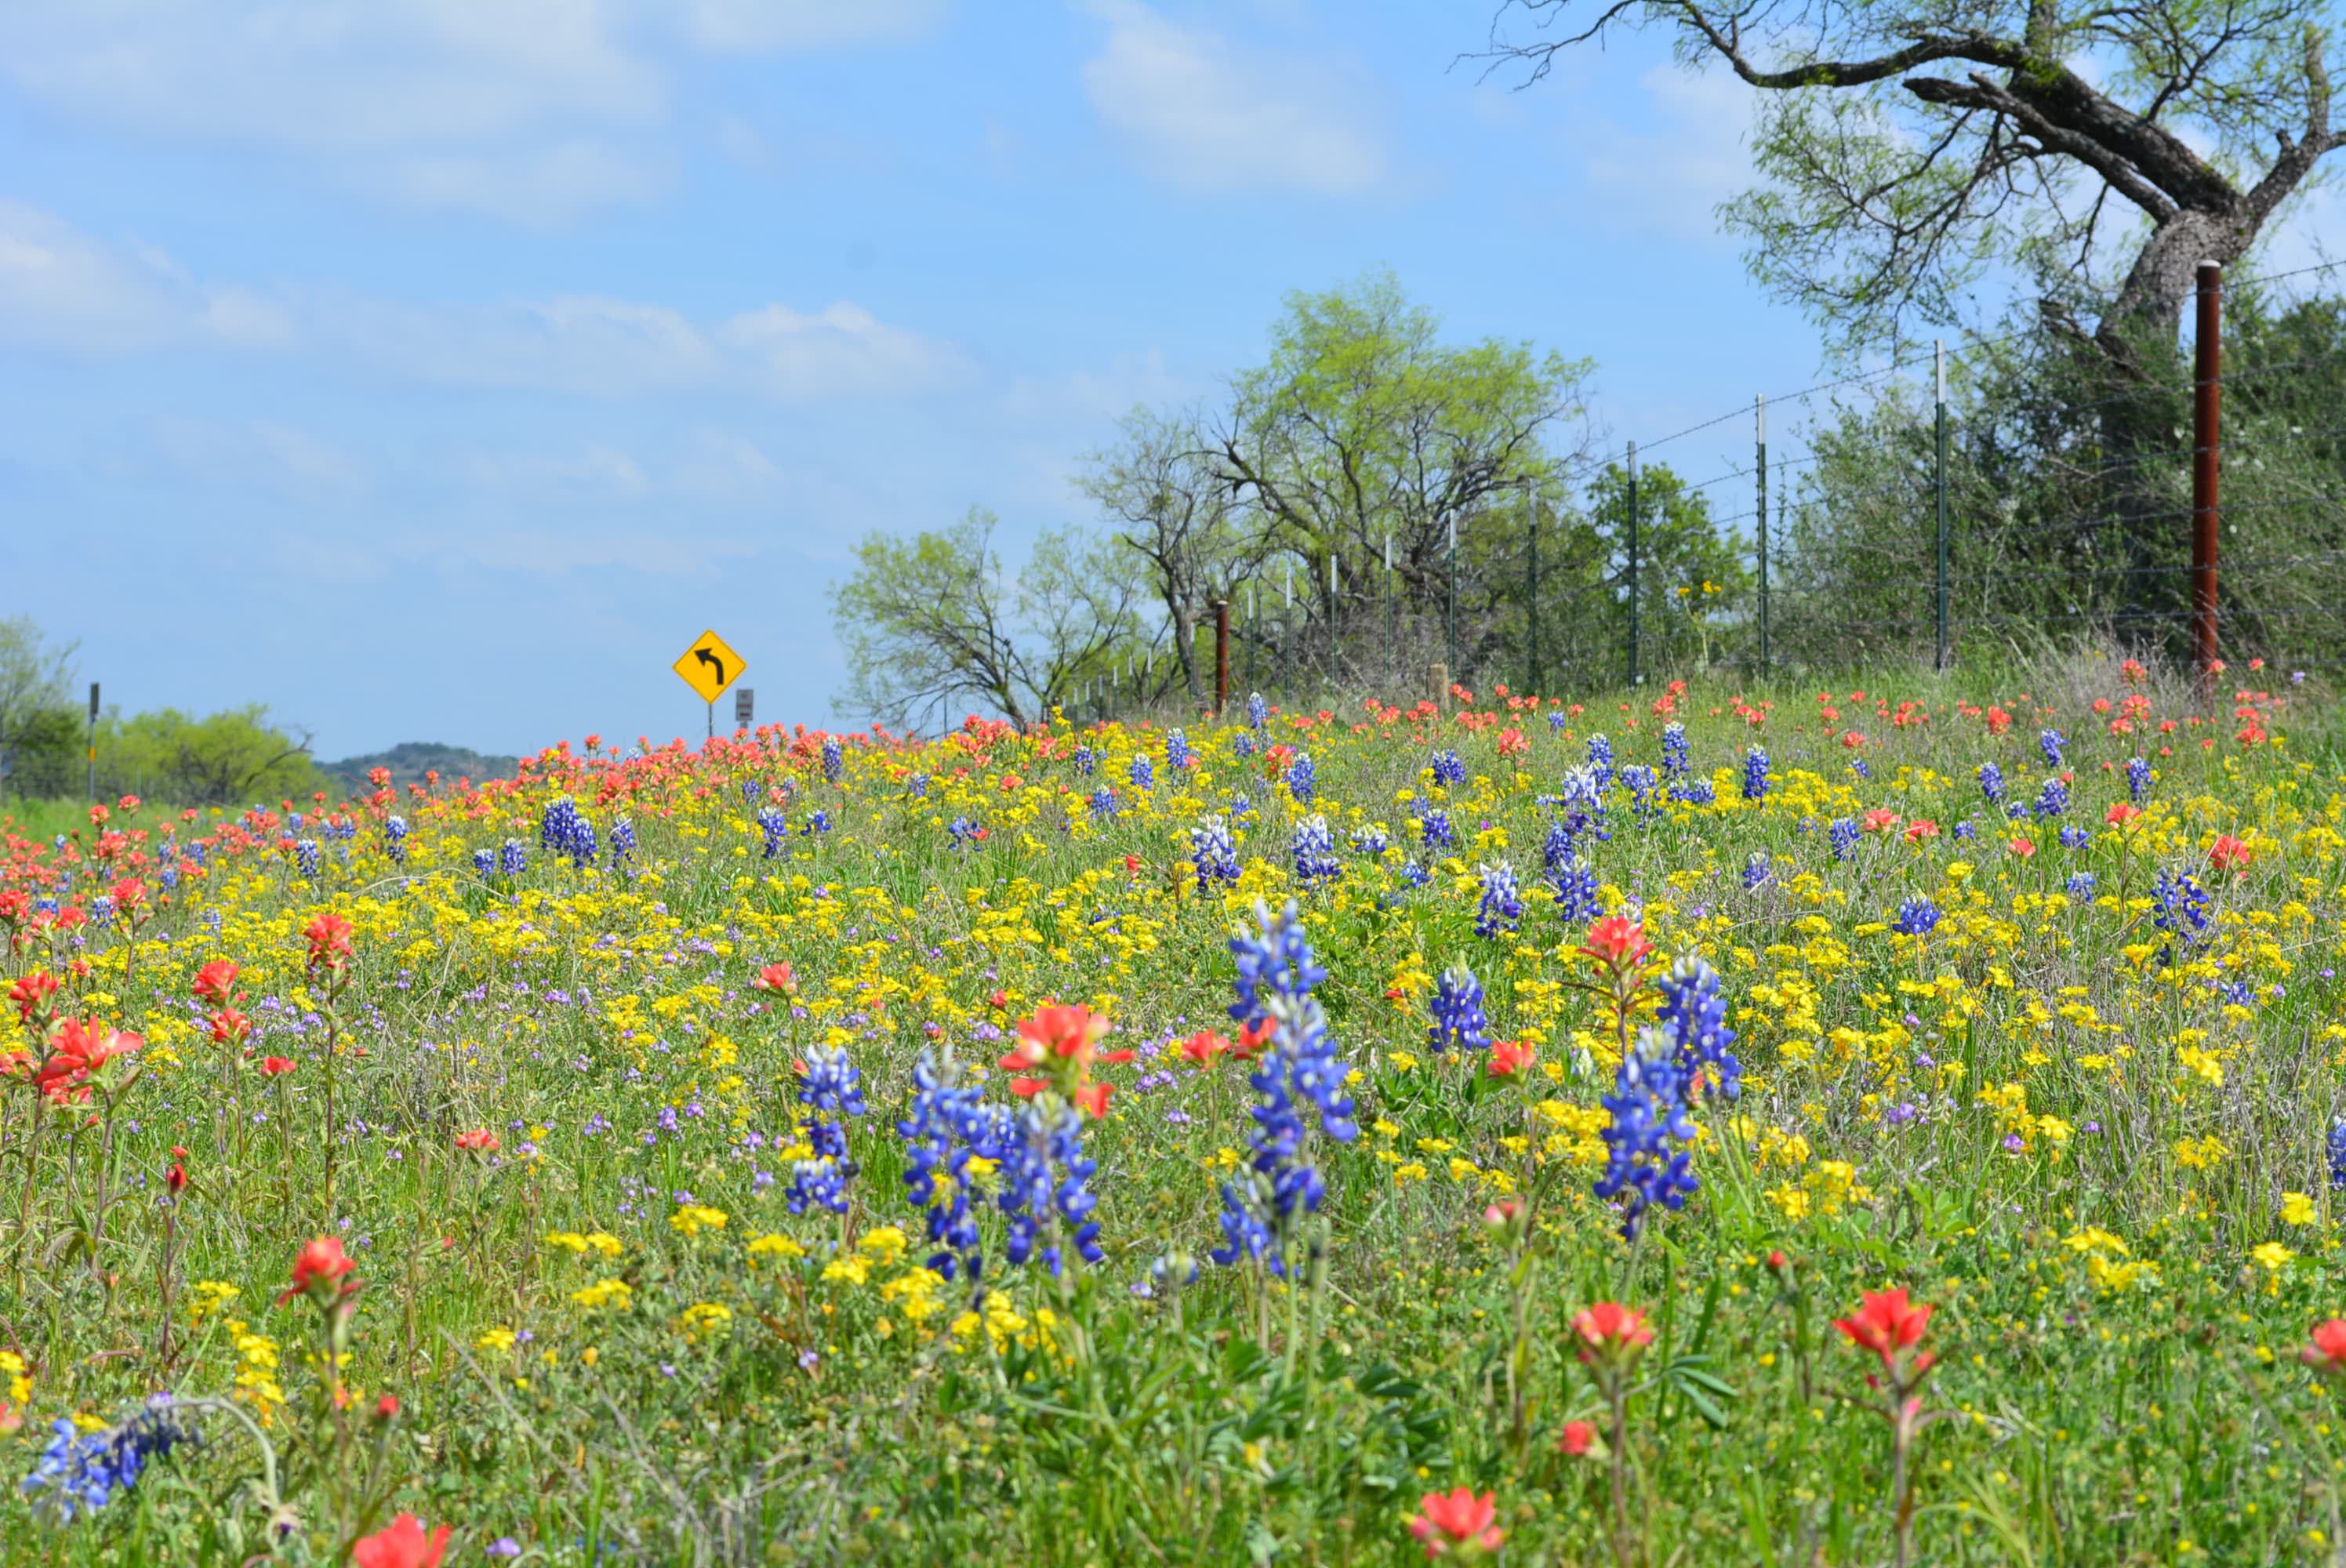 Where To Find Wildflowers? Experts Weigh In - Science Friday